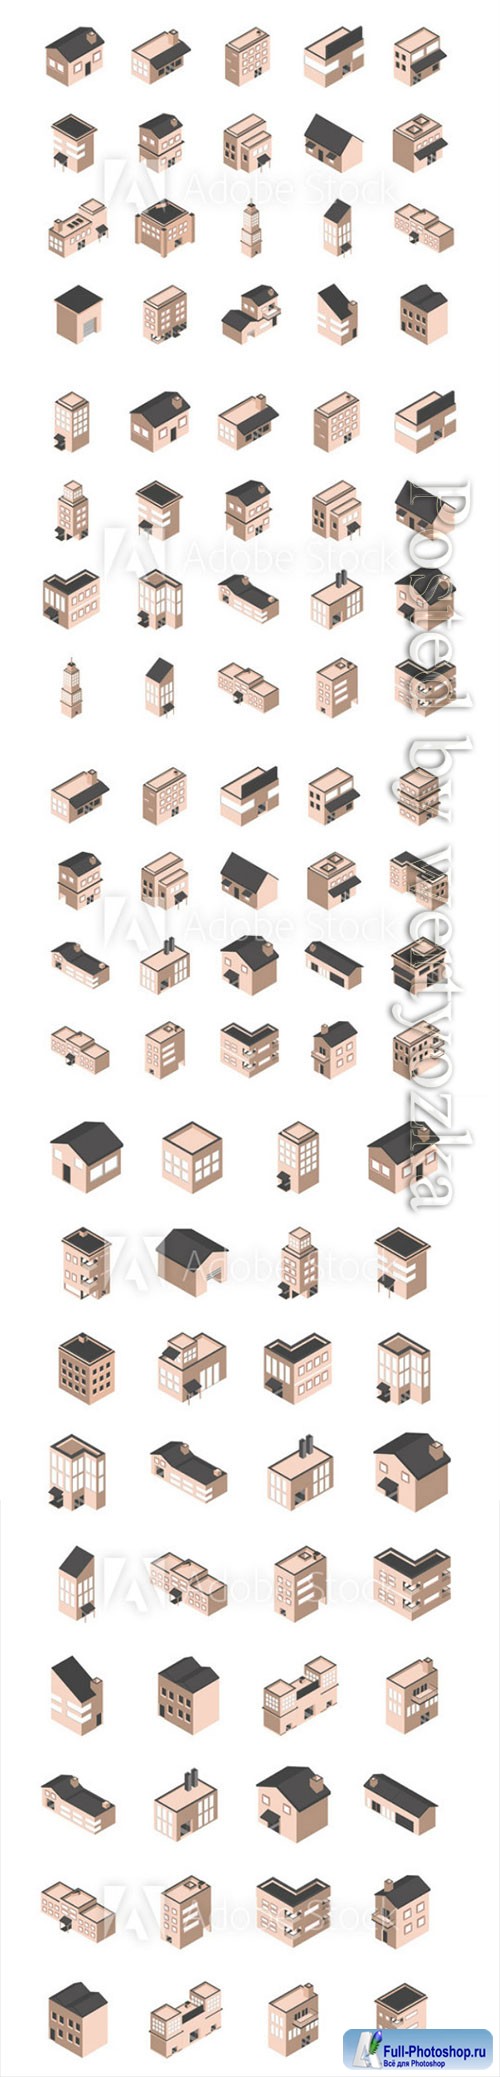 Building isometric style icons vector set